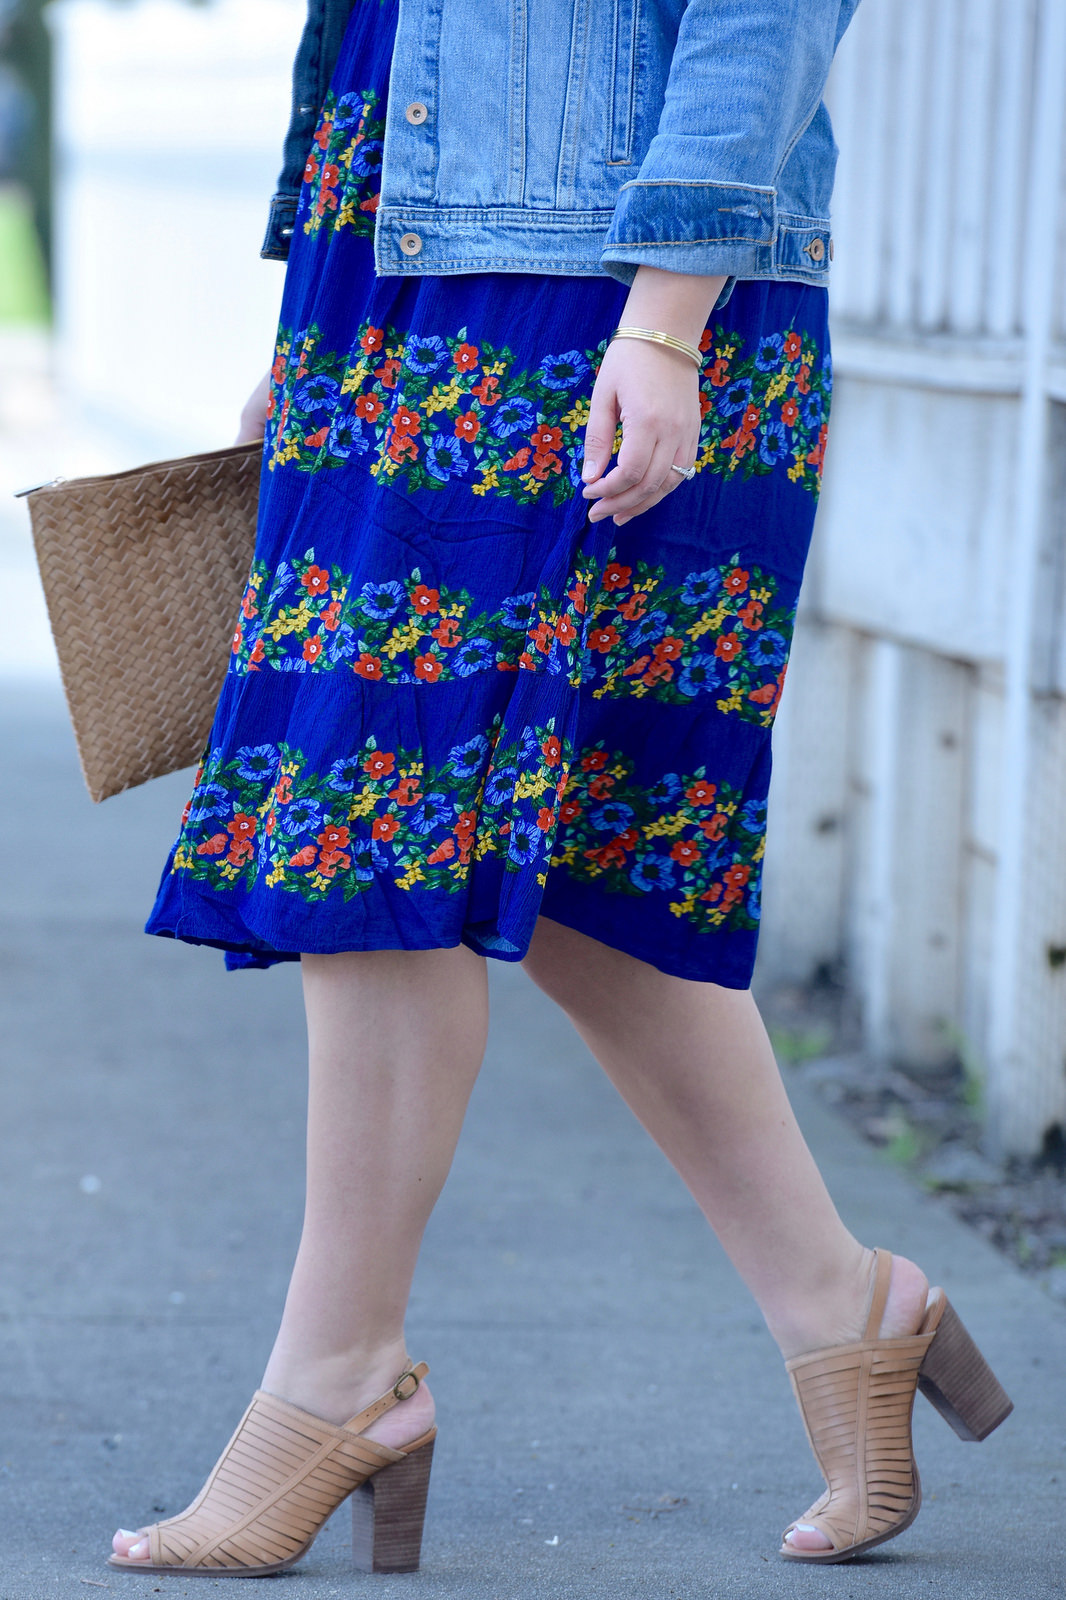 Florals Dress from Old Navy via @GirlwithCurves